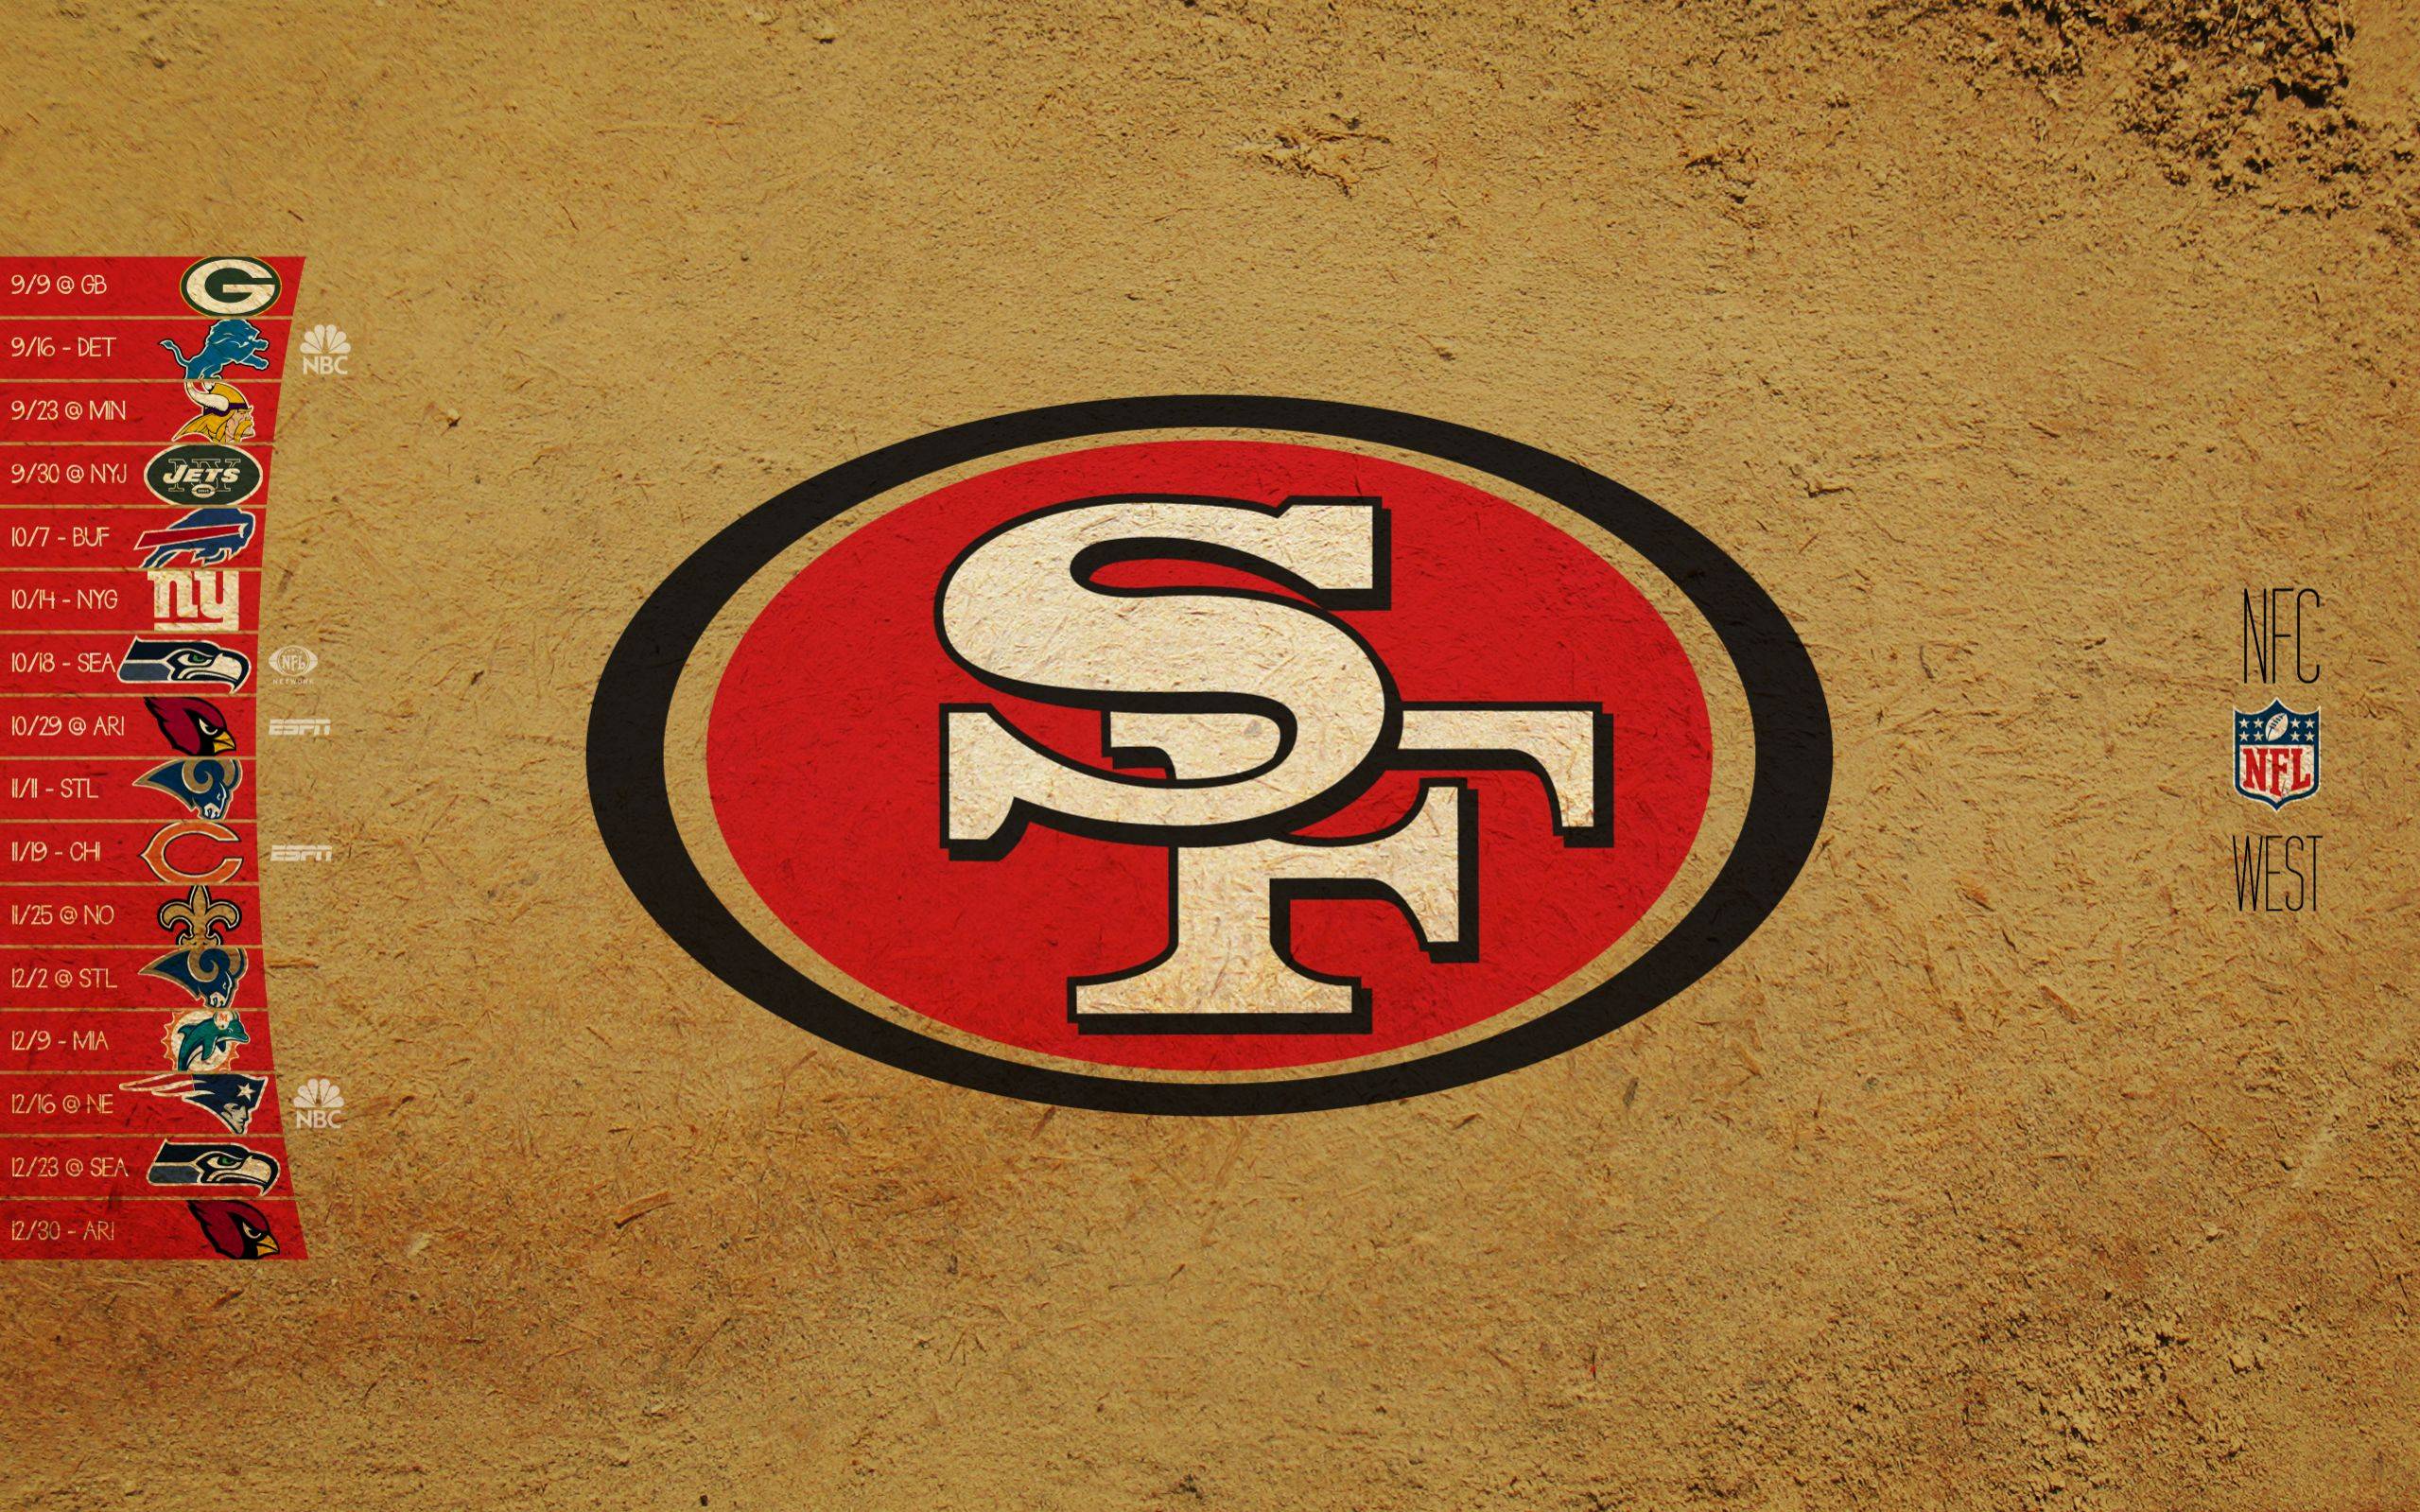 49ers wallpaper and other nfl wallpapers sent me a teaser